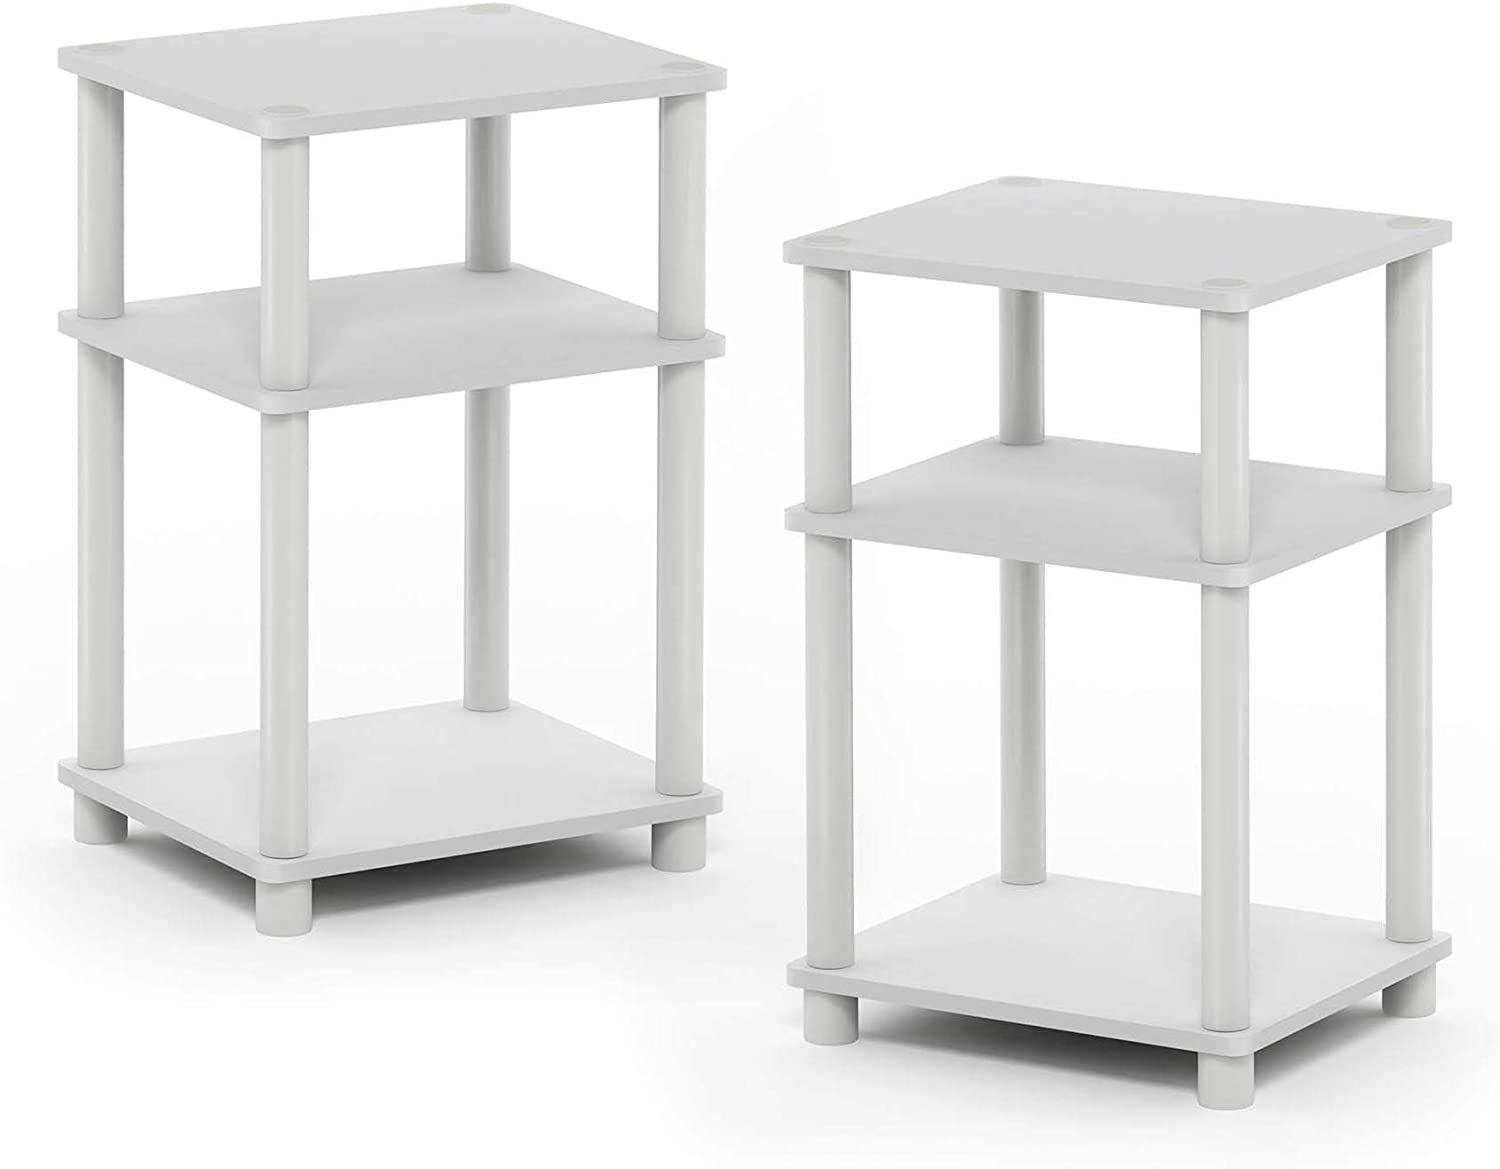 FURINNO Space Saving White End Tables For Bedroom, Set Of 2